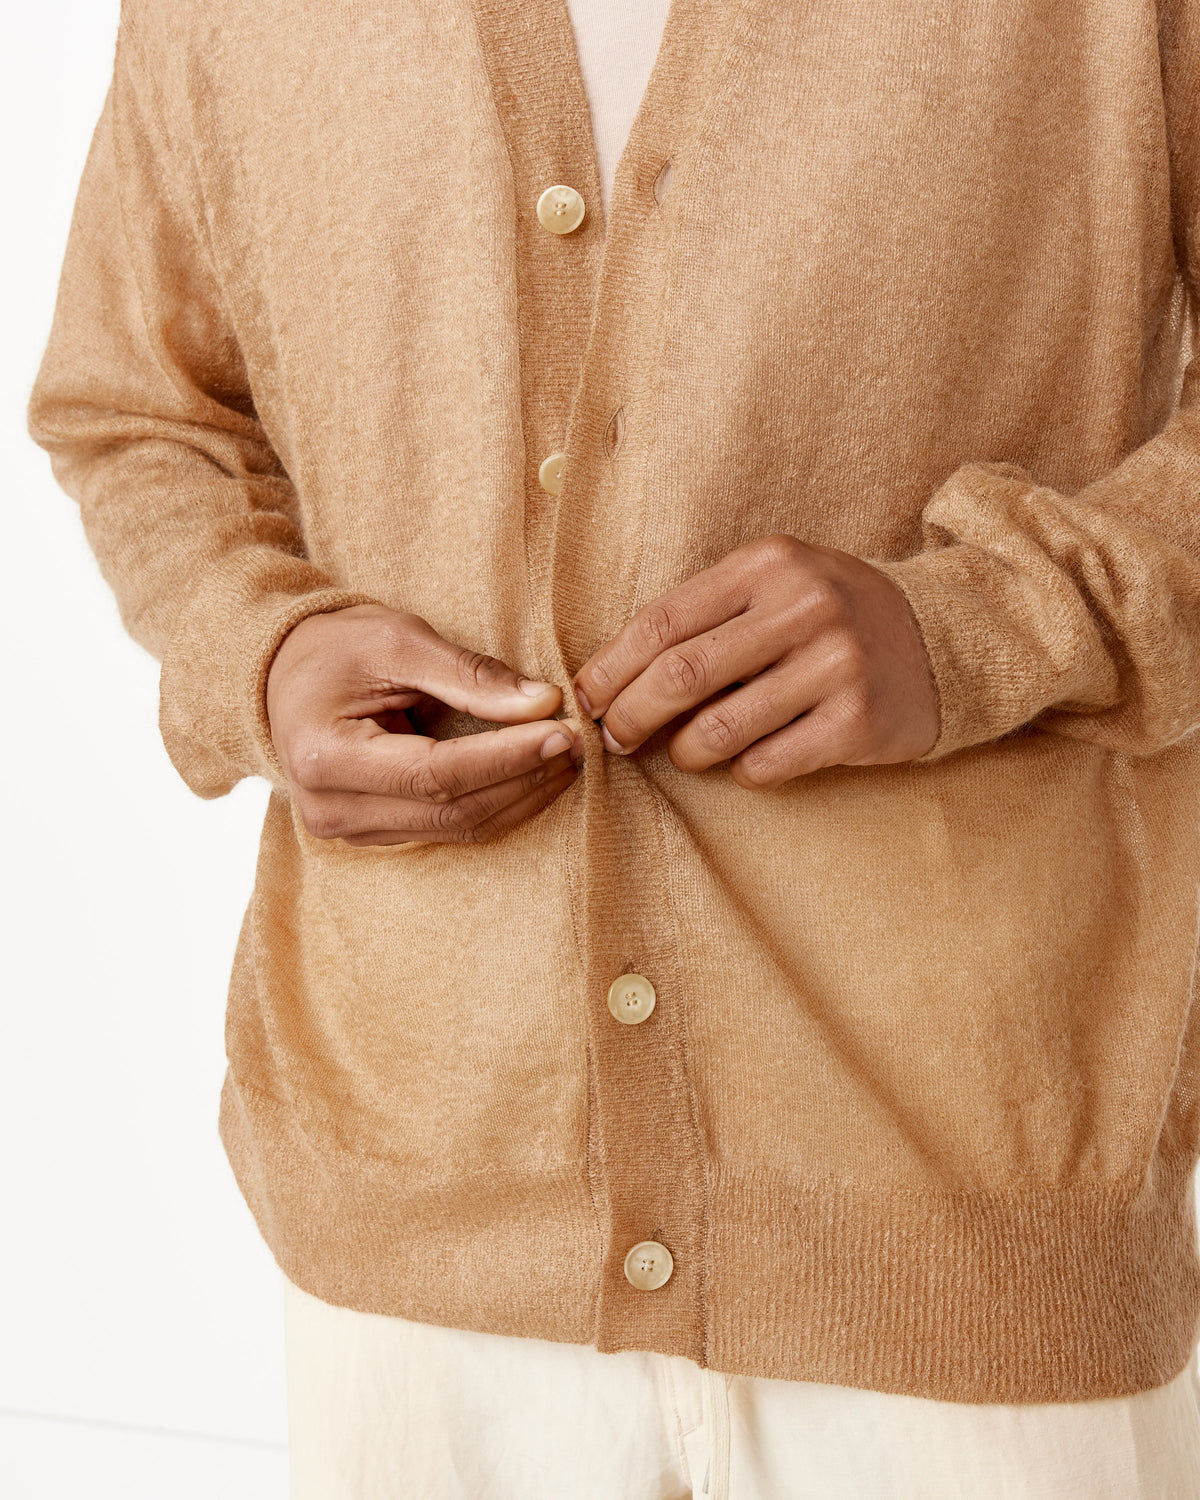 Shop Our Kid Mohair Sheer Knit Cardigan in Camel Auralee for the